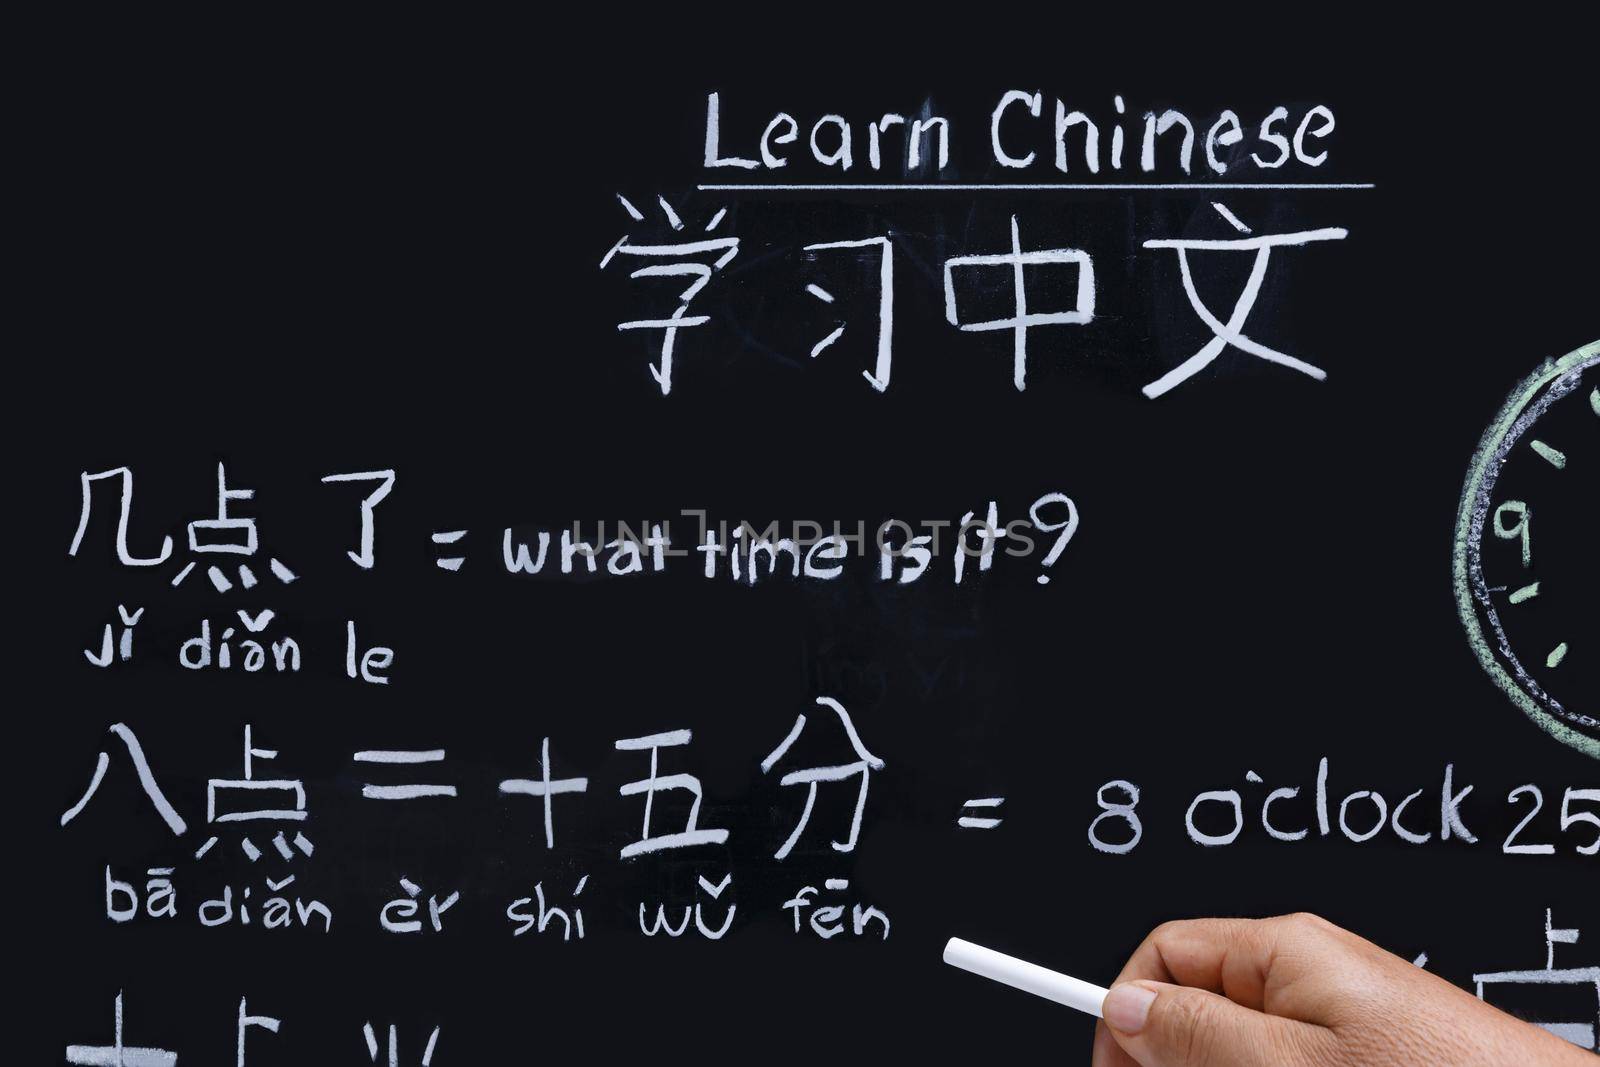 Learning chinese alphabet "pinyin" in classroom. by toa55